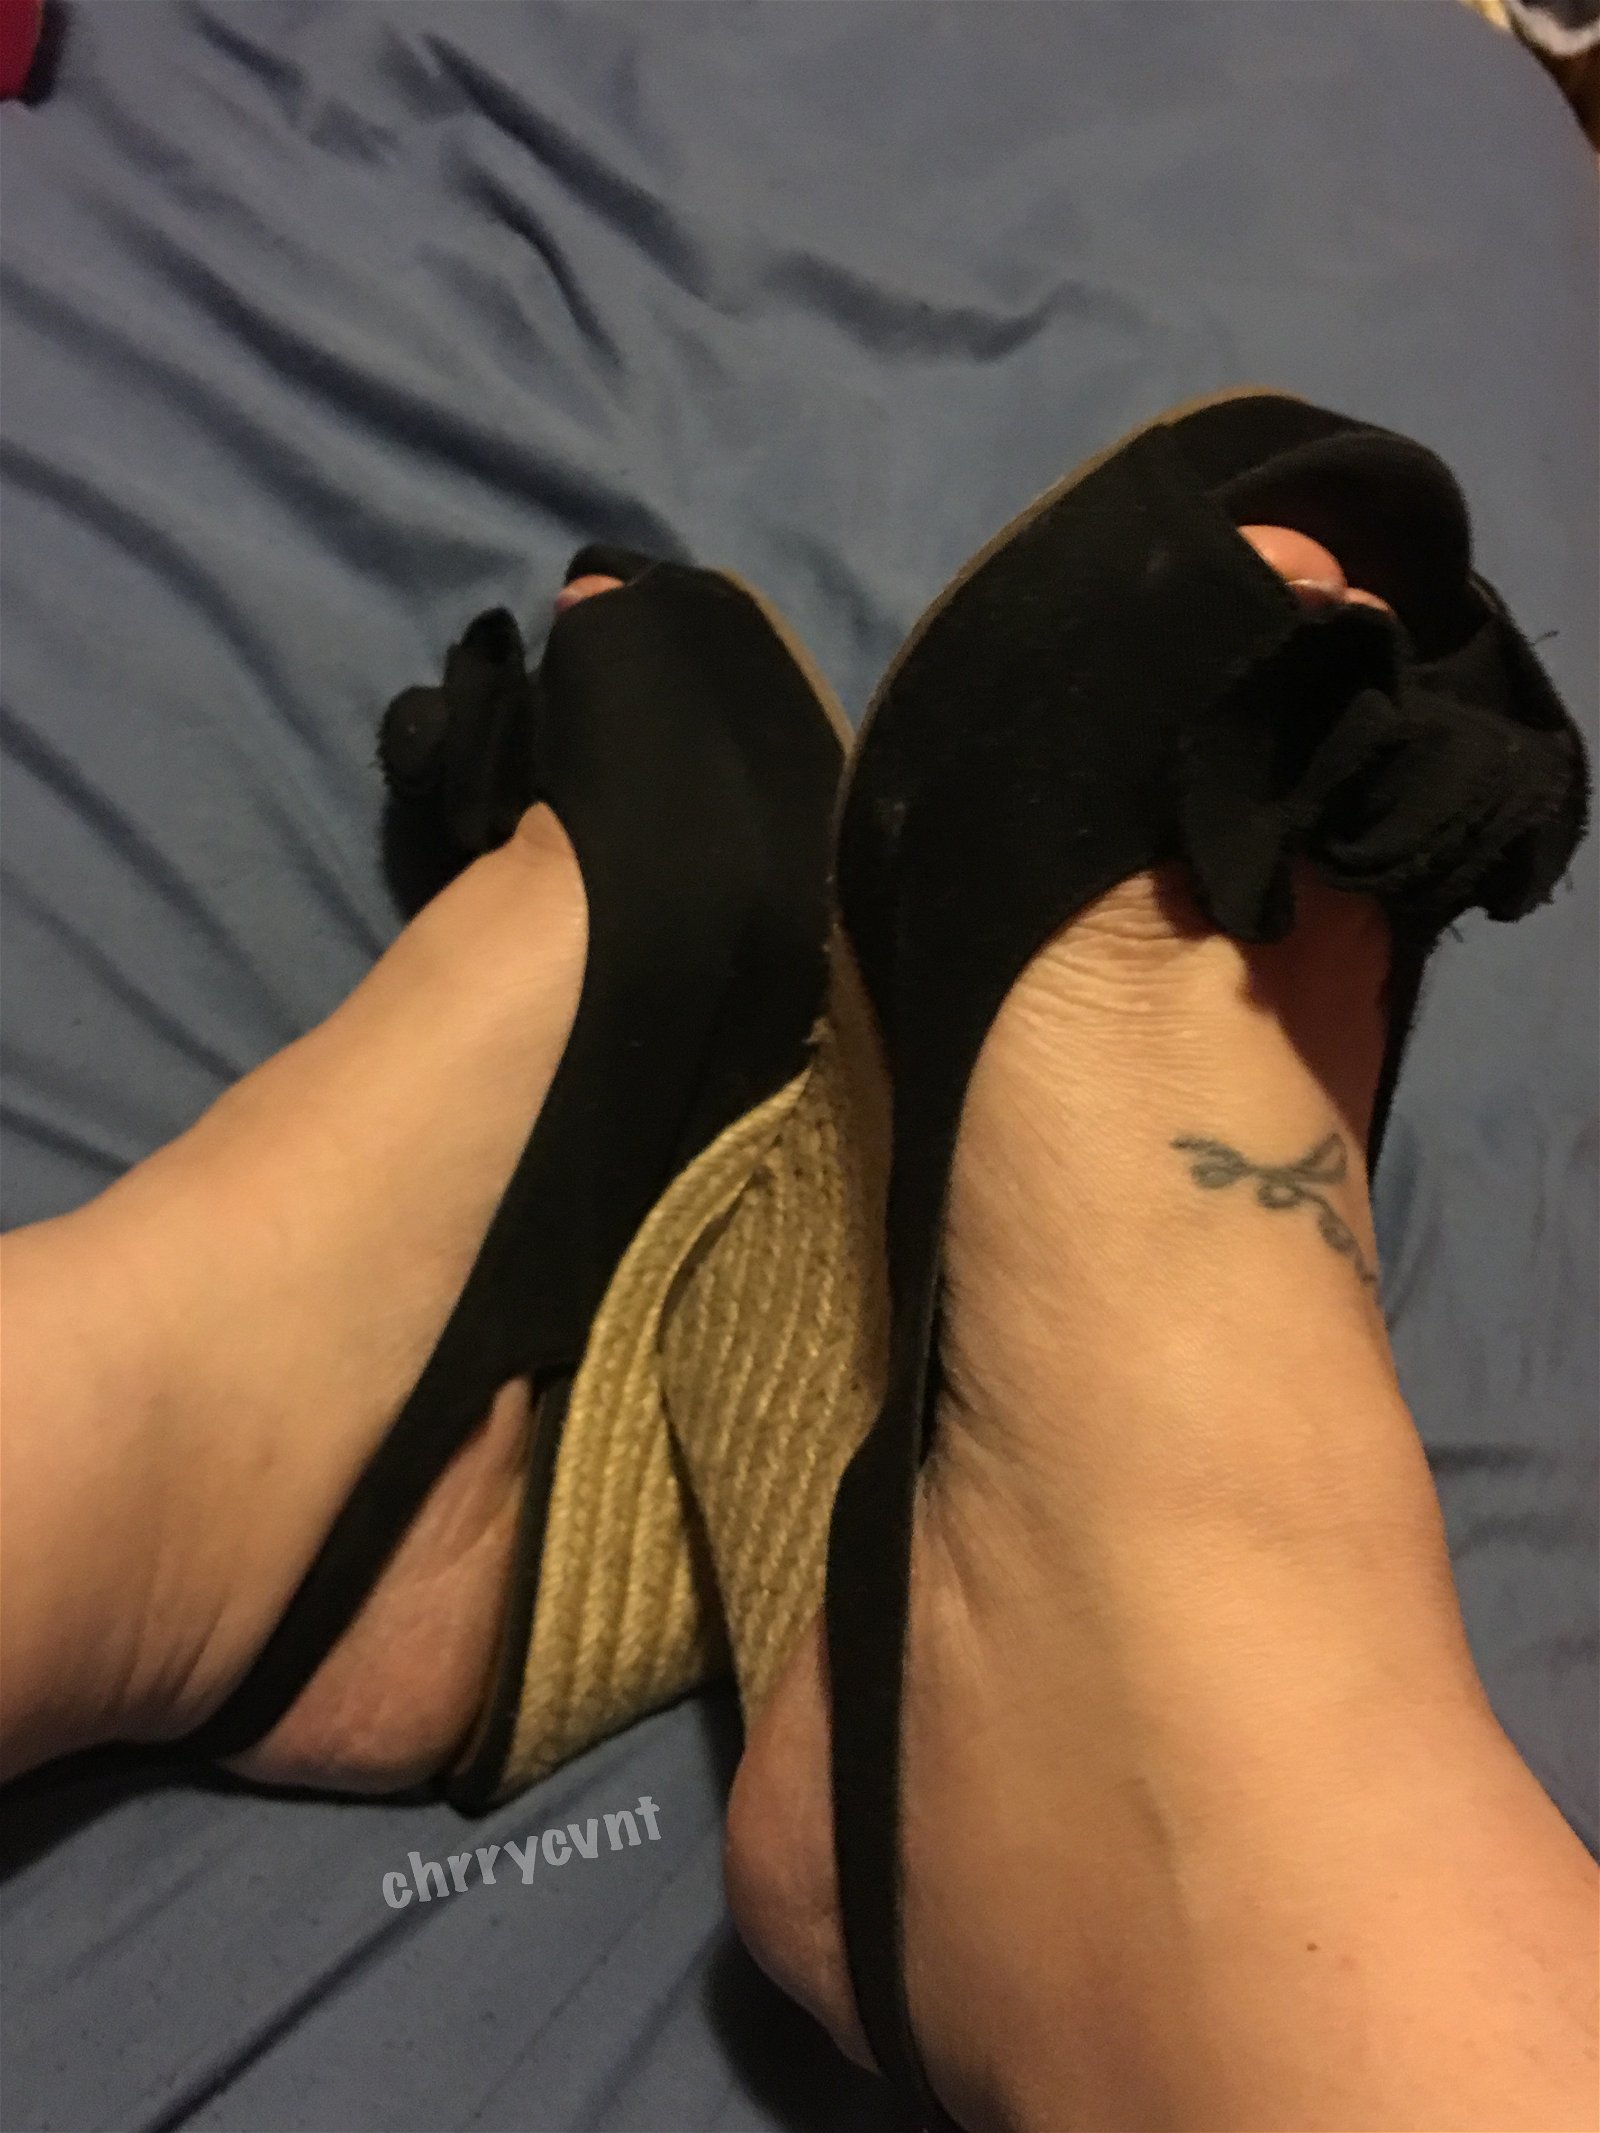 Watch the Photo by demi / chrrycvnt with the username @chrrycvnt, who is a verified user, posted on December 17, 2018. The post is about the topic Foot Fetish. and the text says 'FEET PICS! 

     🍒$5/3
     🍒$10/5

cashapp/circlepay only • kik me @ chrrycvnt to purchase'